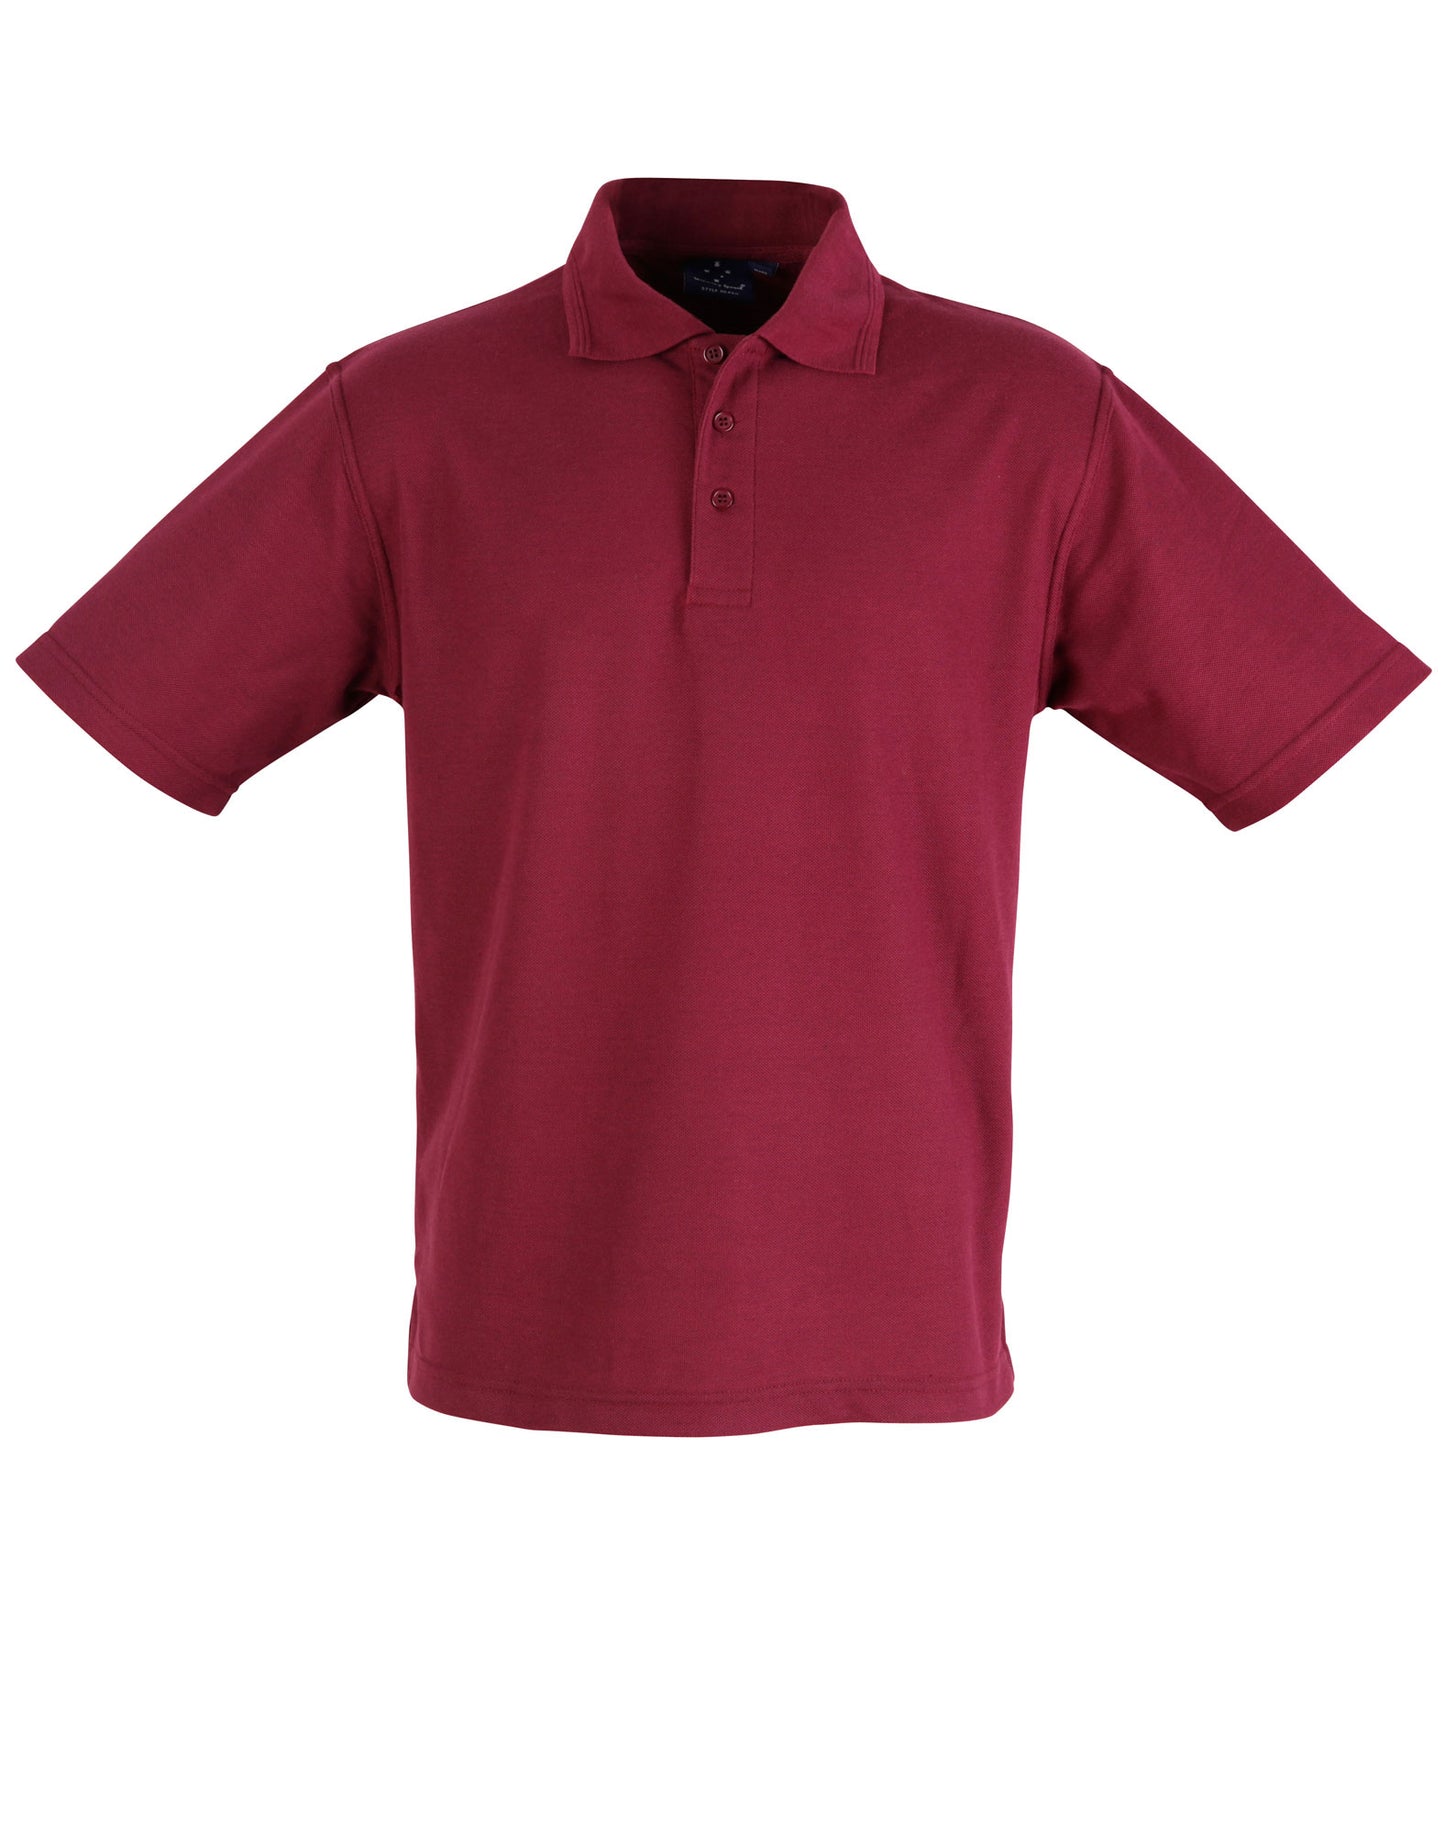 Poly Cotton Pique Polo Shirt - made by AIW